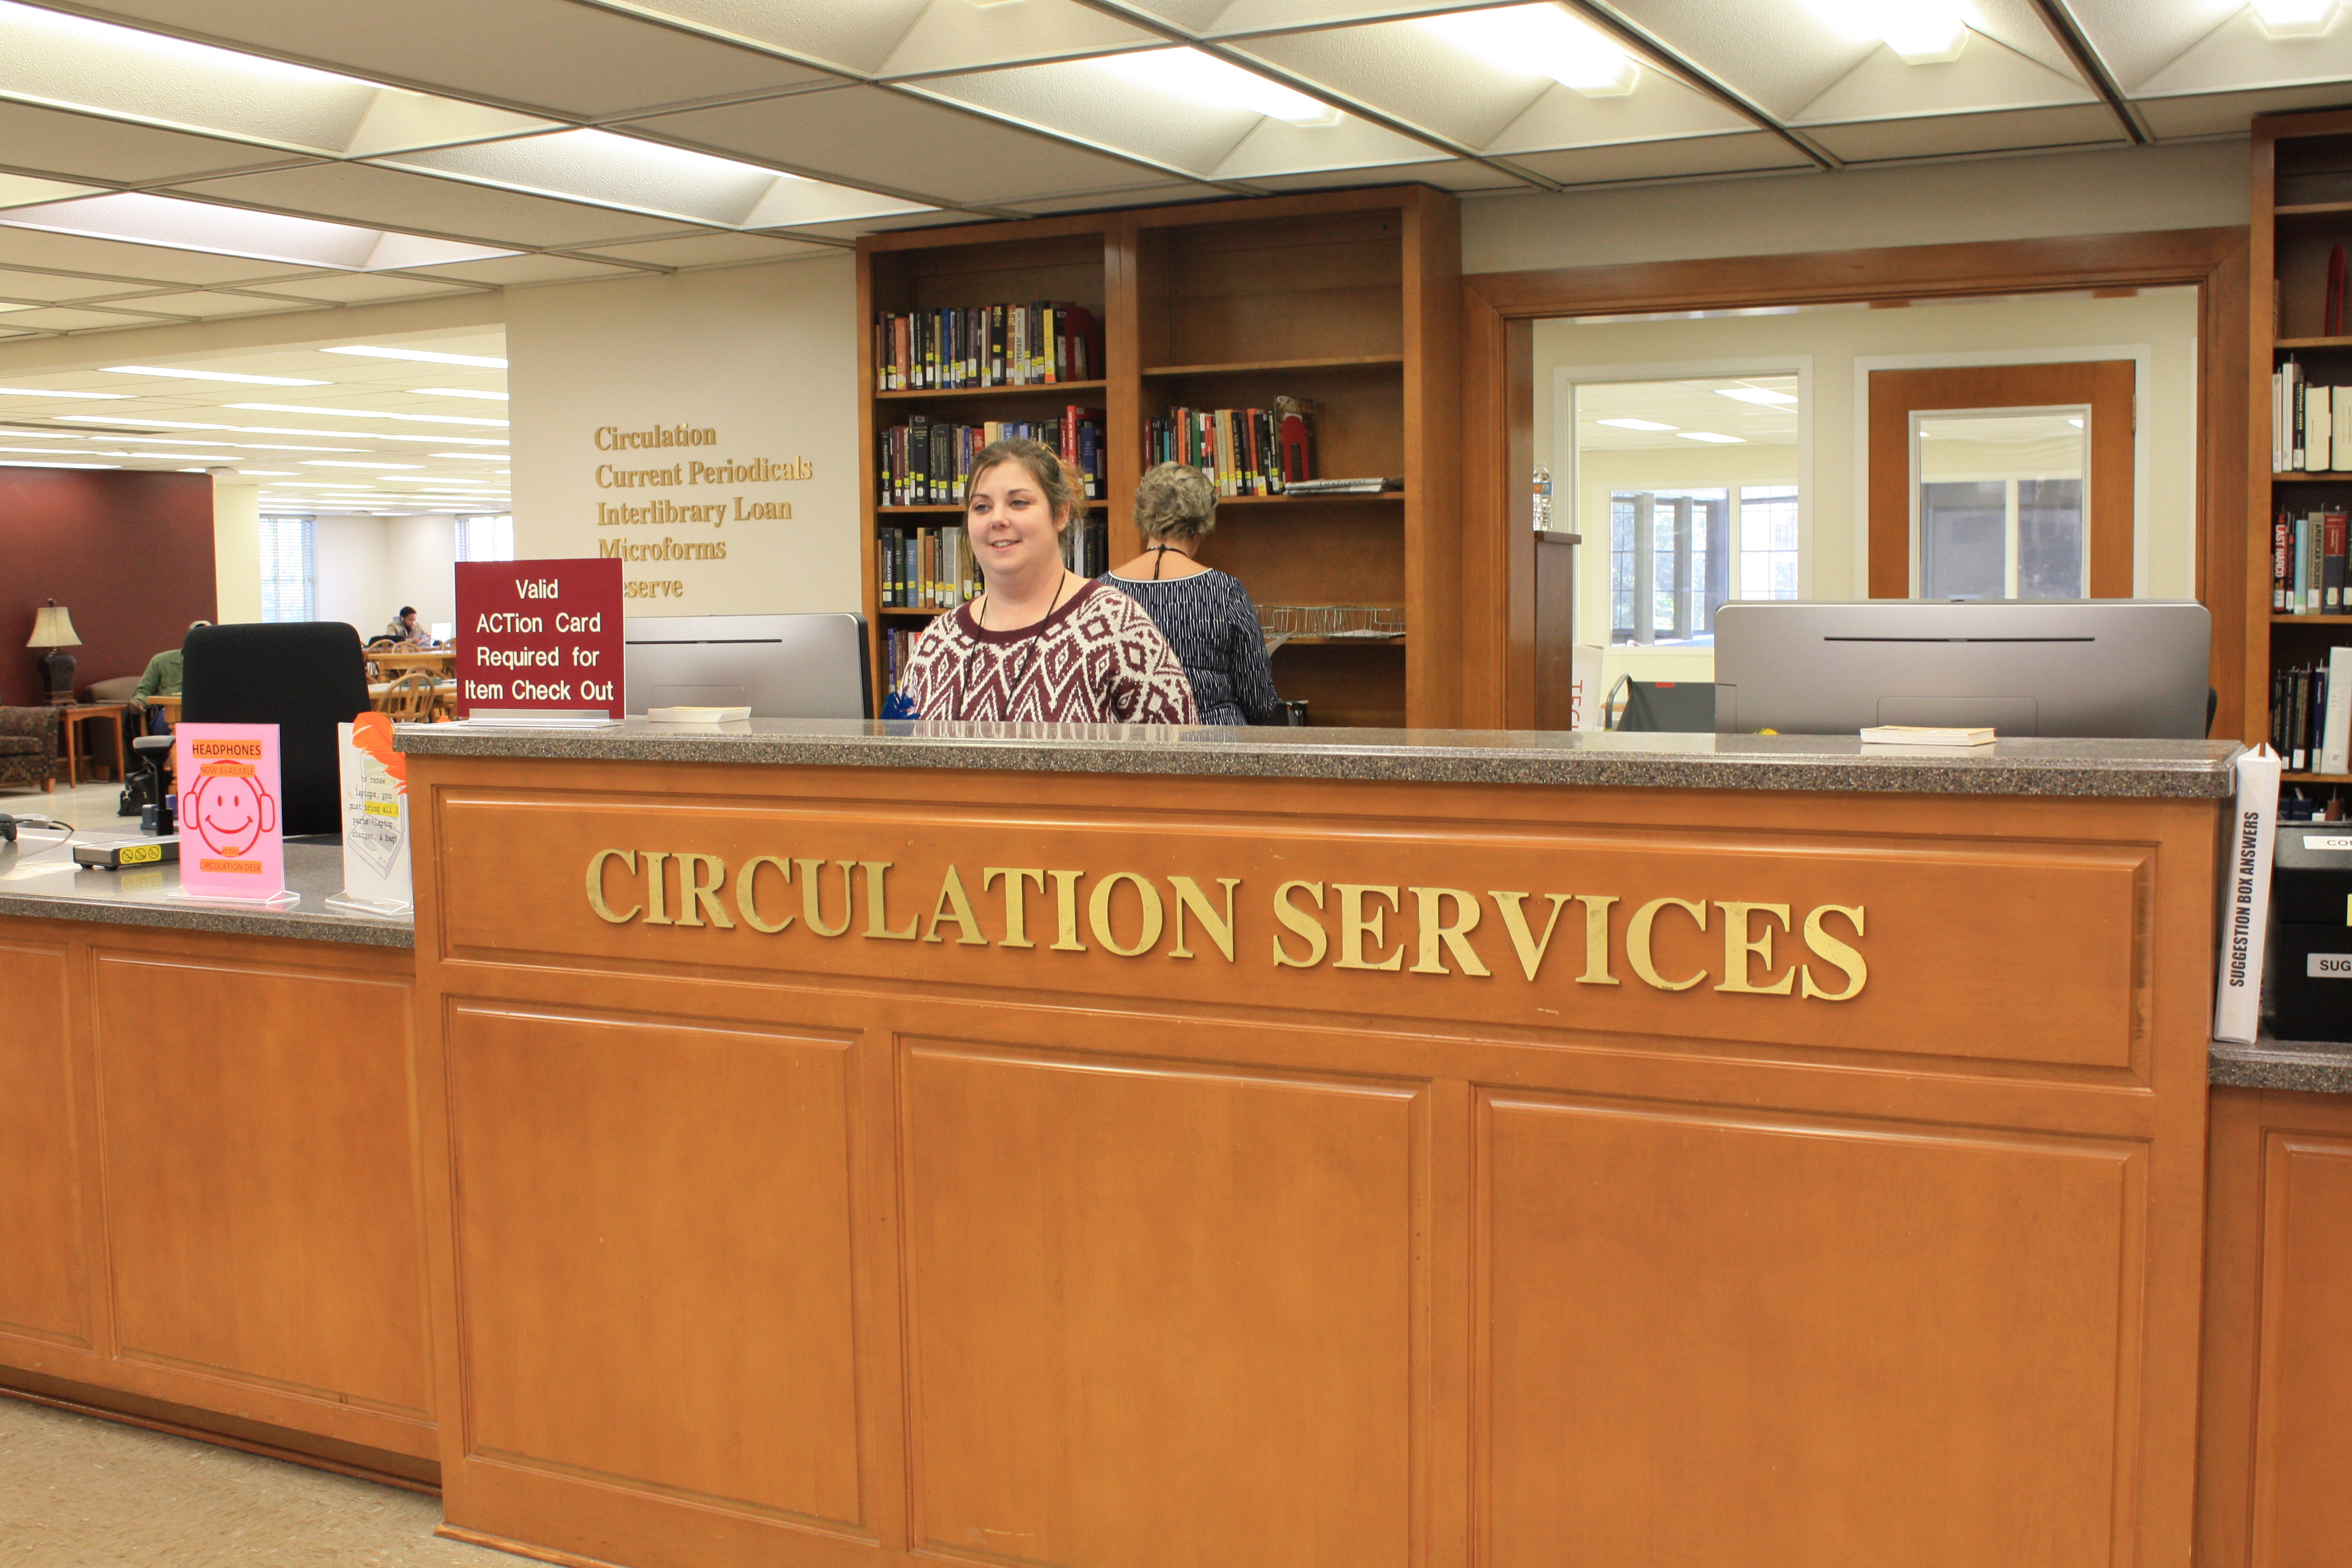 Faculty Resources from UA Libraries